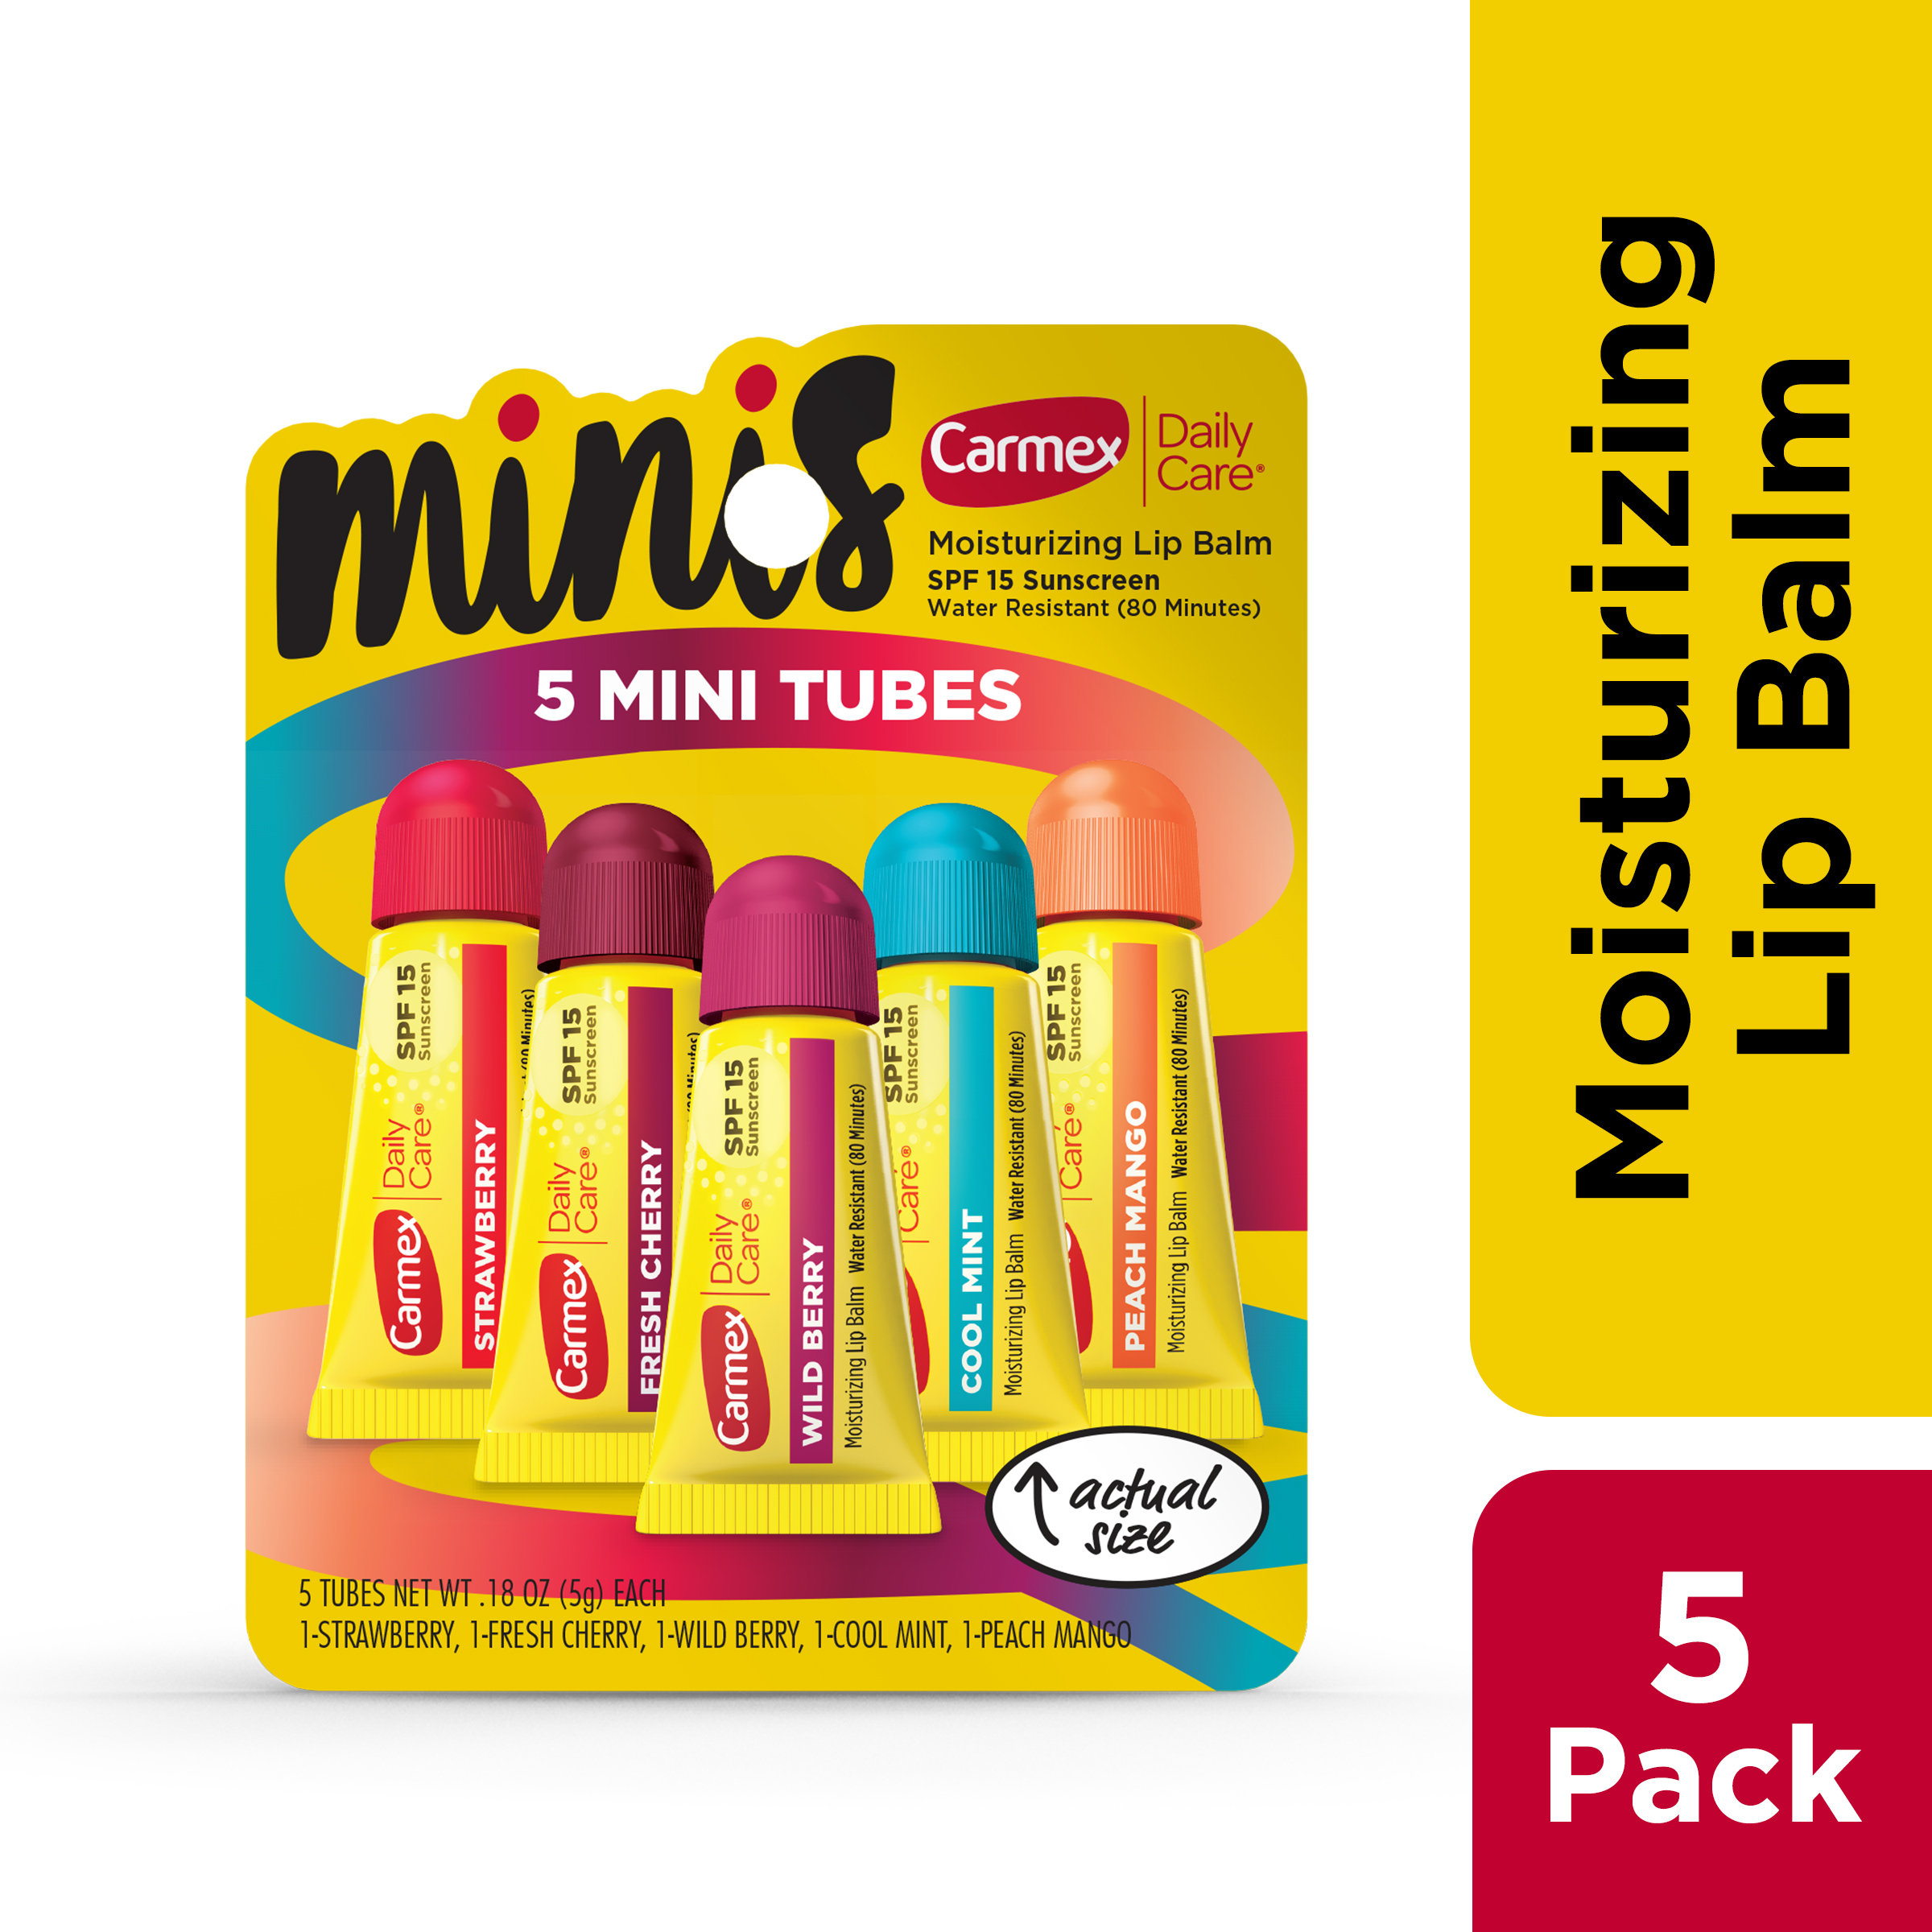 Carmex Daily Care Minis Lip Balm Tubes, SPF 15, Multi-Flavor Lip Balm Pack, 5 Count (1 Pack of 5) - image 1 of 11